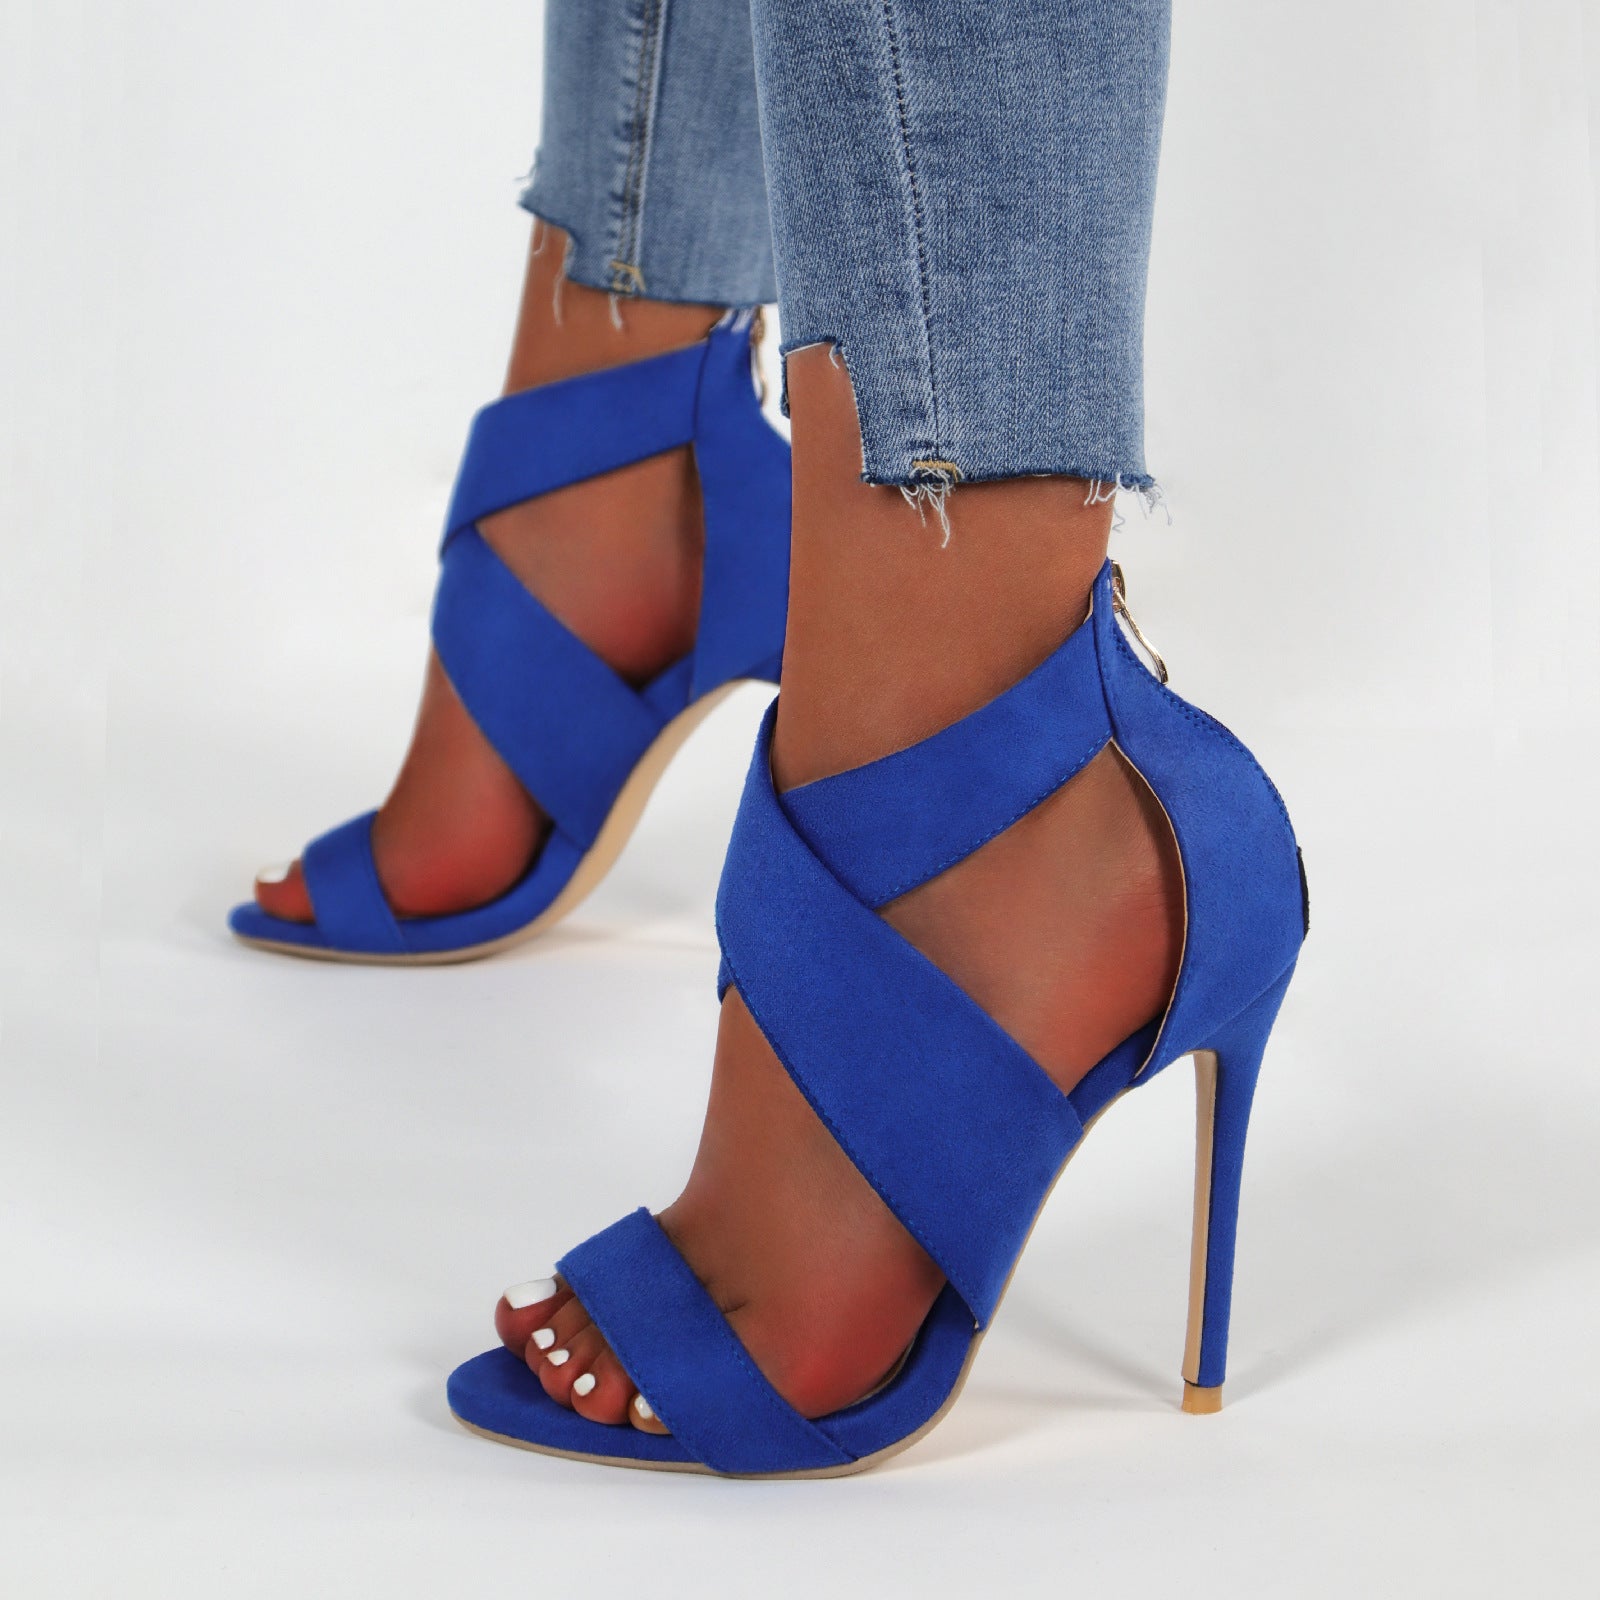 Sexy peep toe criss cross ankle wrapped heels summer party dress stiletto heels